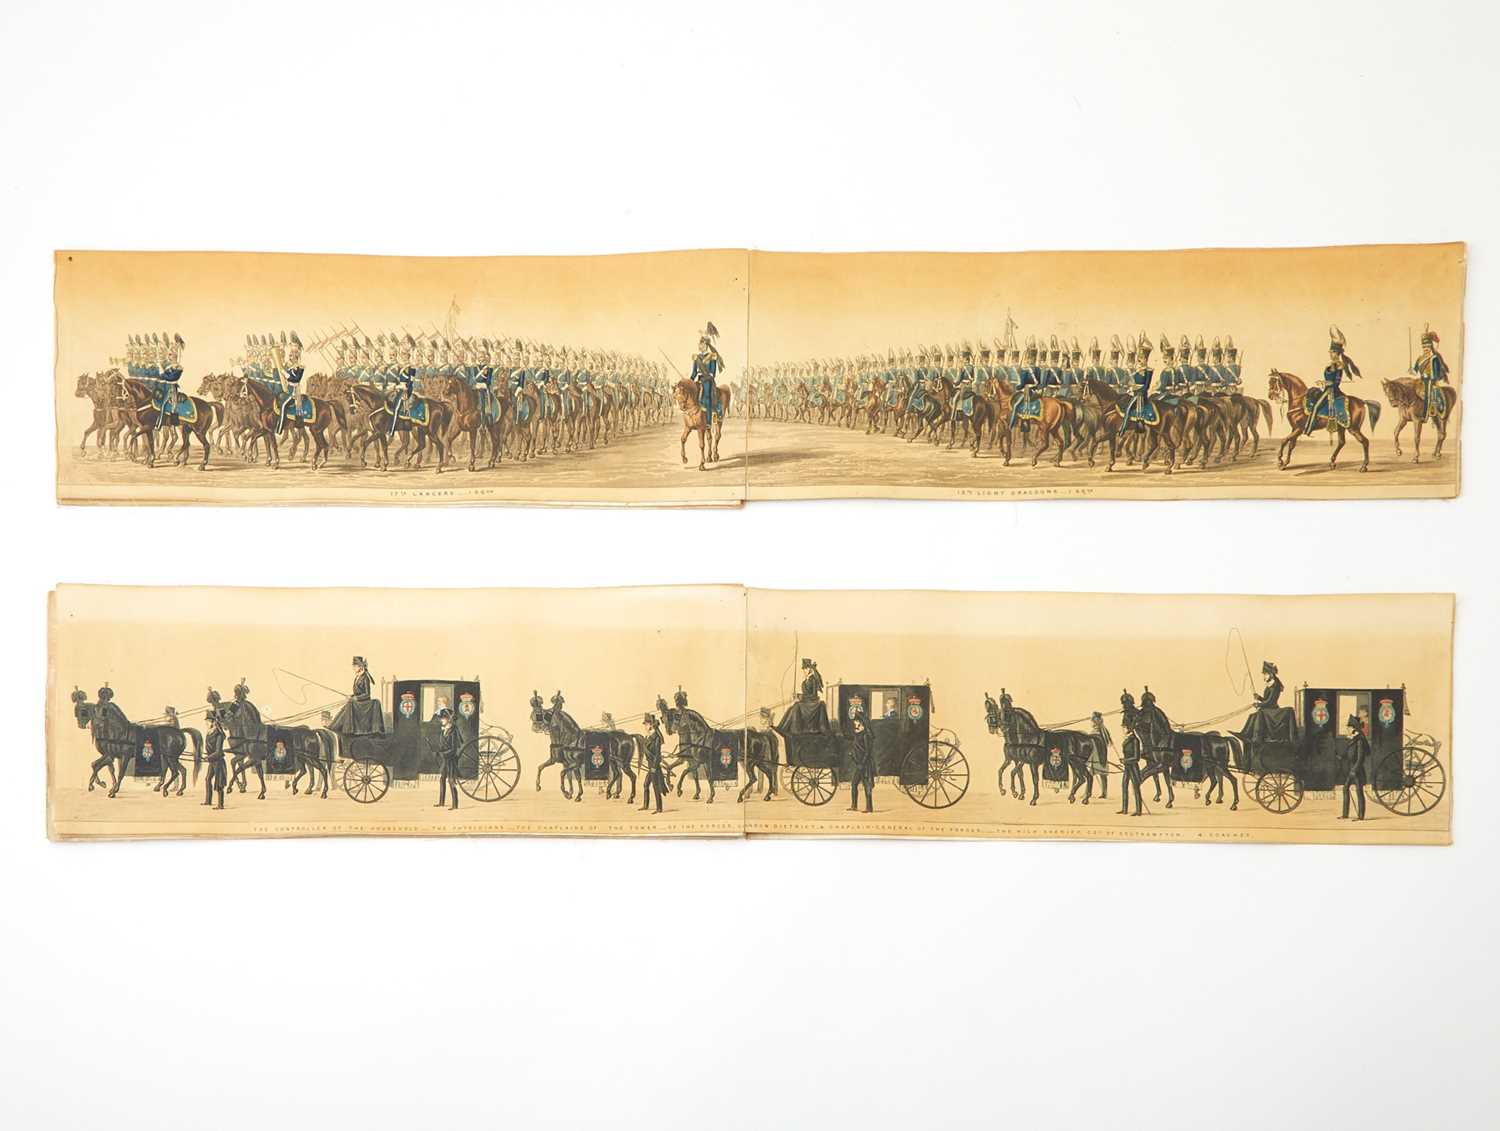 Lot 209 - A very long panorama showing the funeral procession of the Duke of Wellington